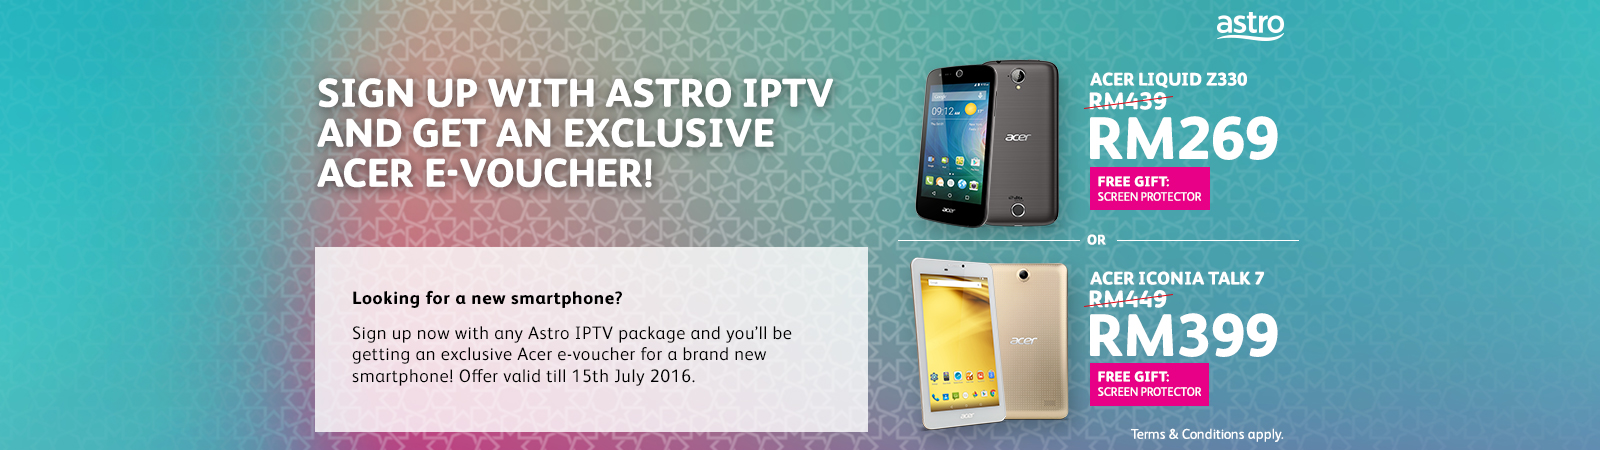 Get exclusive deals on Acer products when subscribing to Astro IPTV! 33